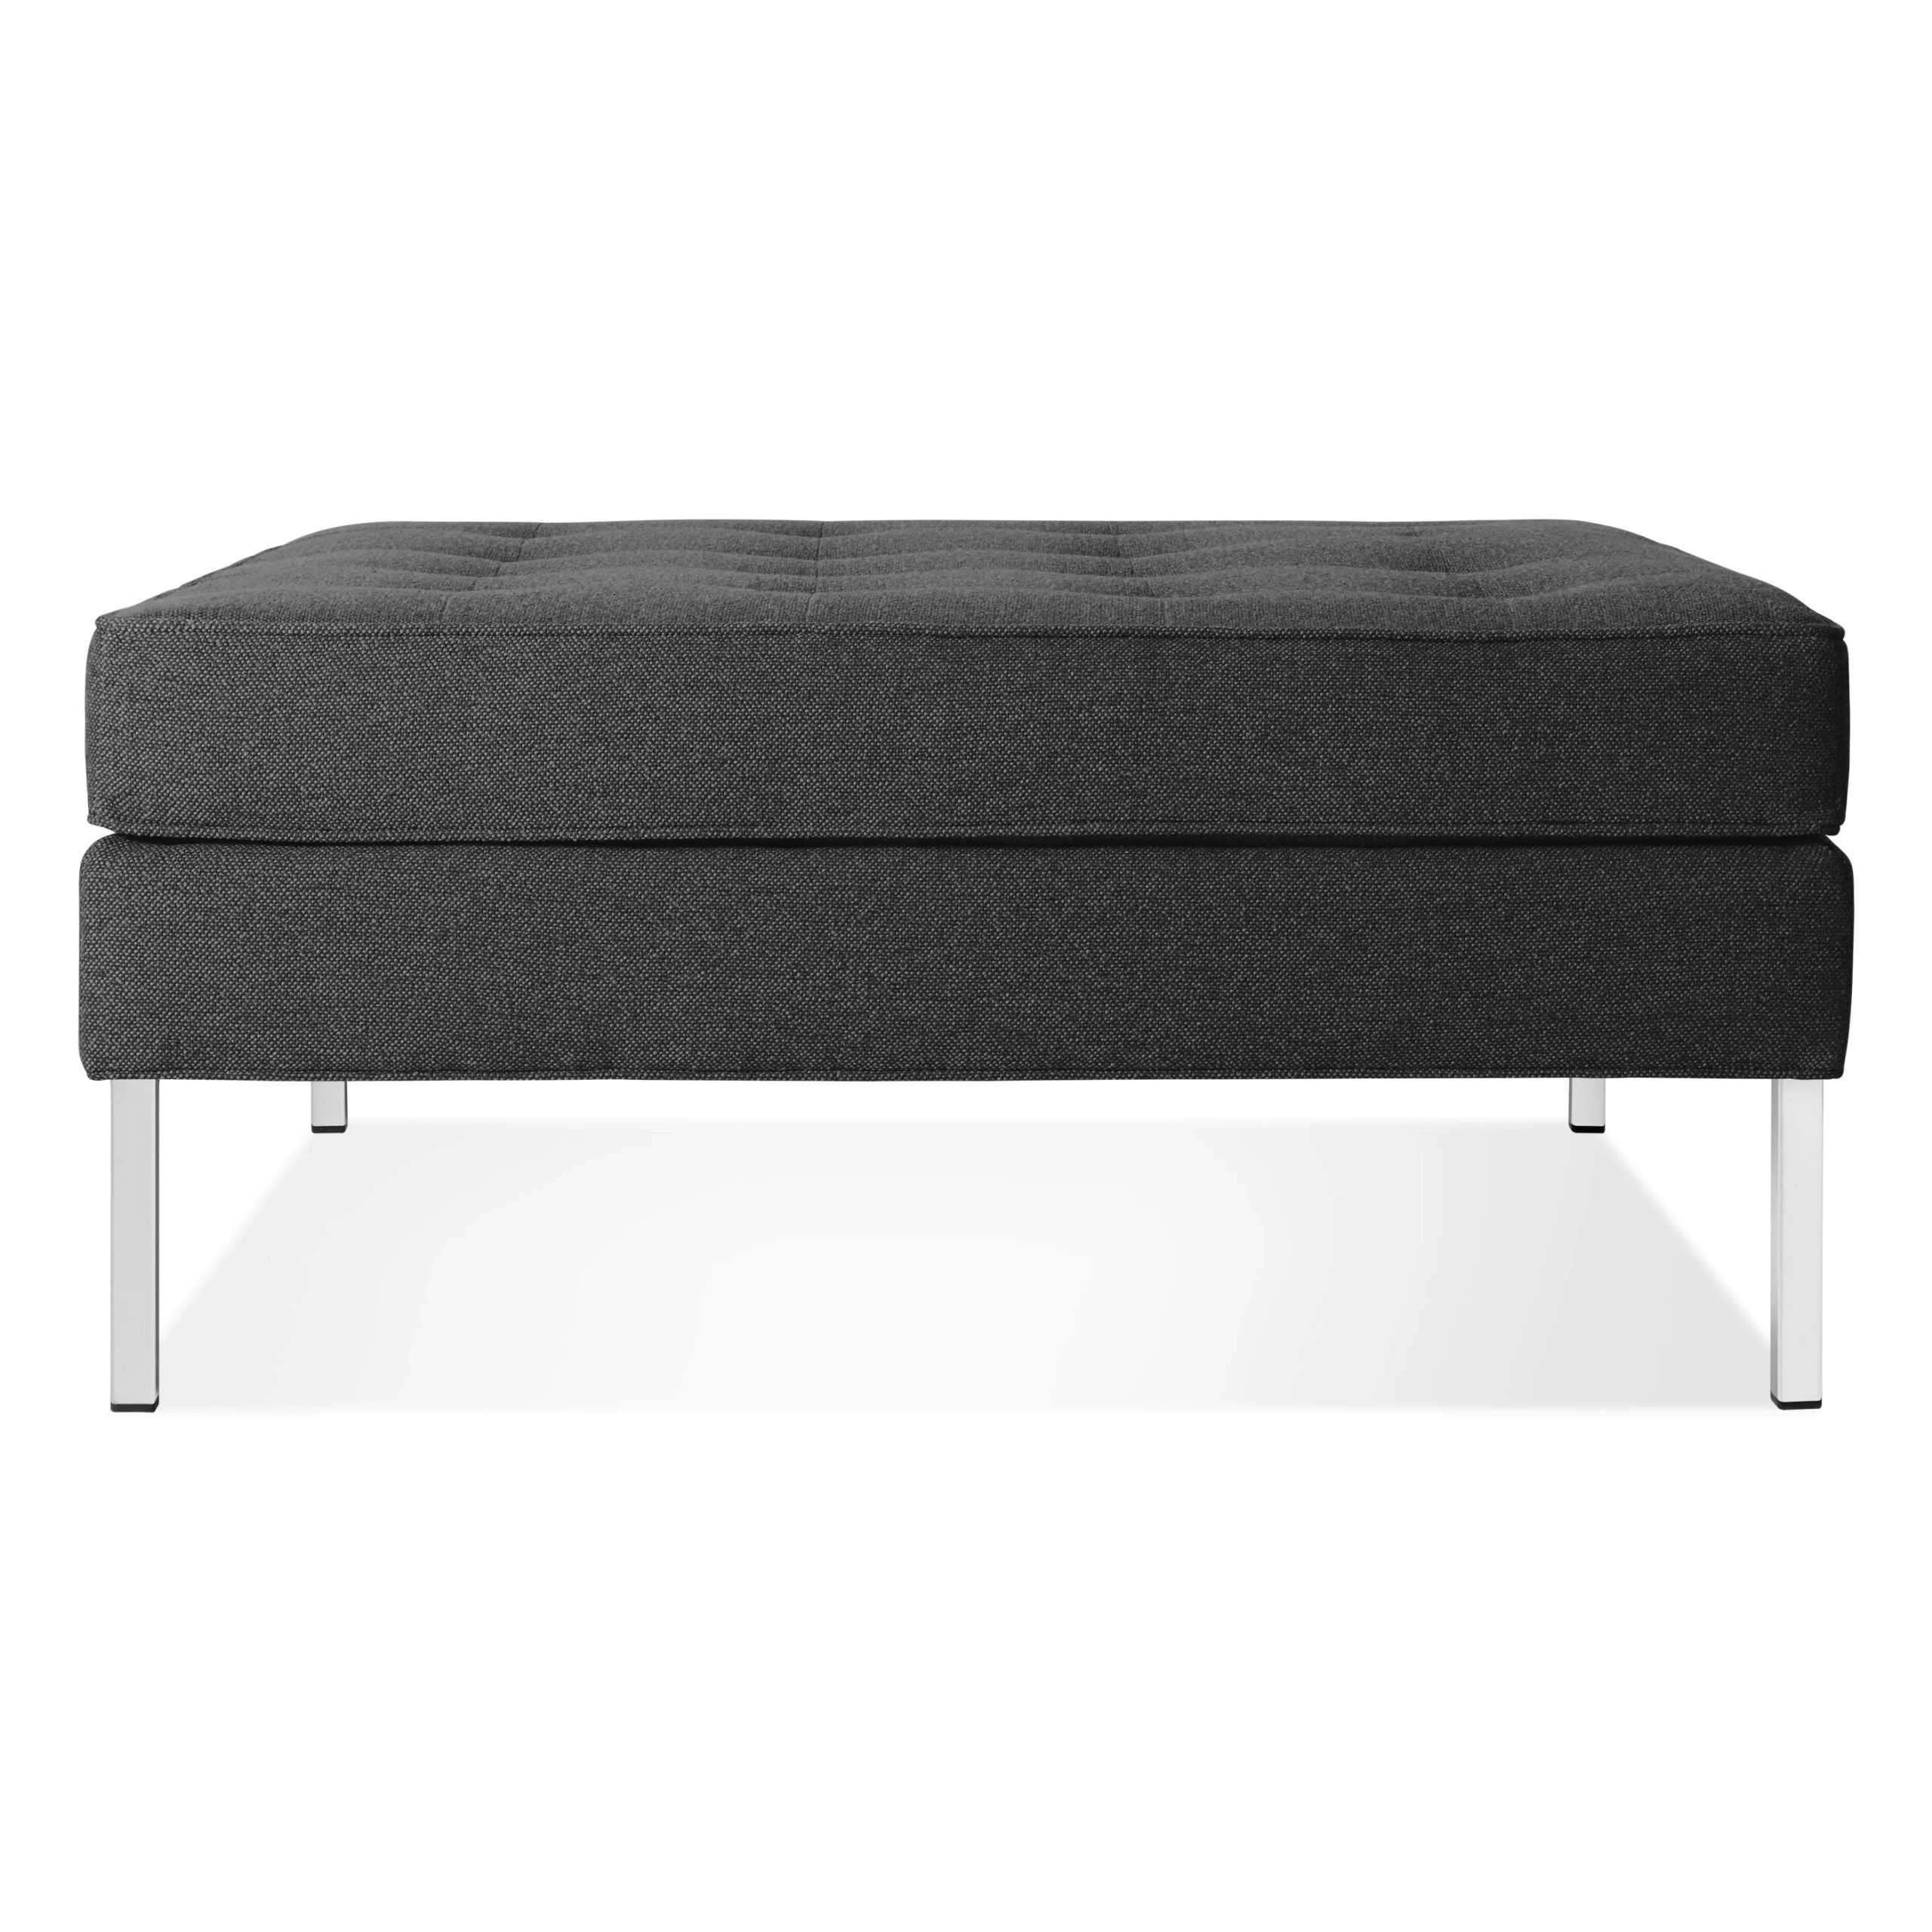 2020 Charcoal Dot Ottomans Intended For Blu Dot Paramount Large Square Ottoman (View 6 of 15)